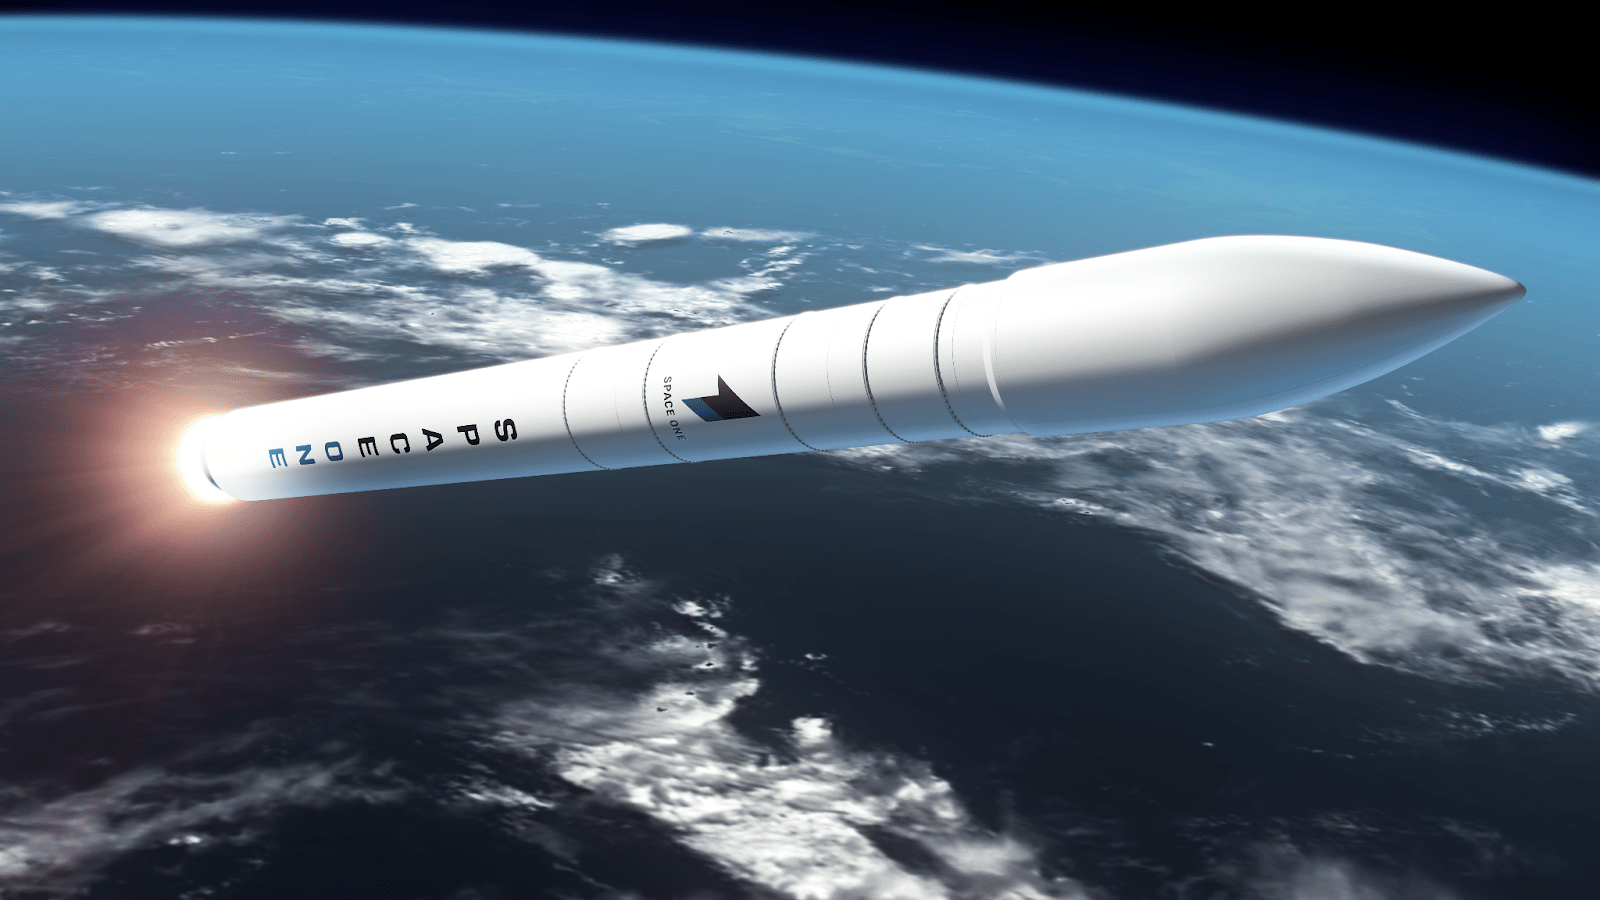 An artist's rendering of a Space One rocket flying over the Earth.